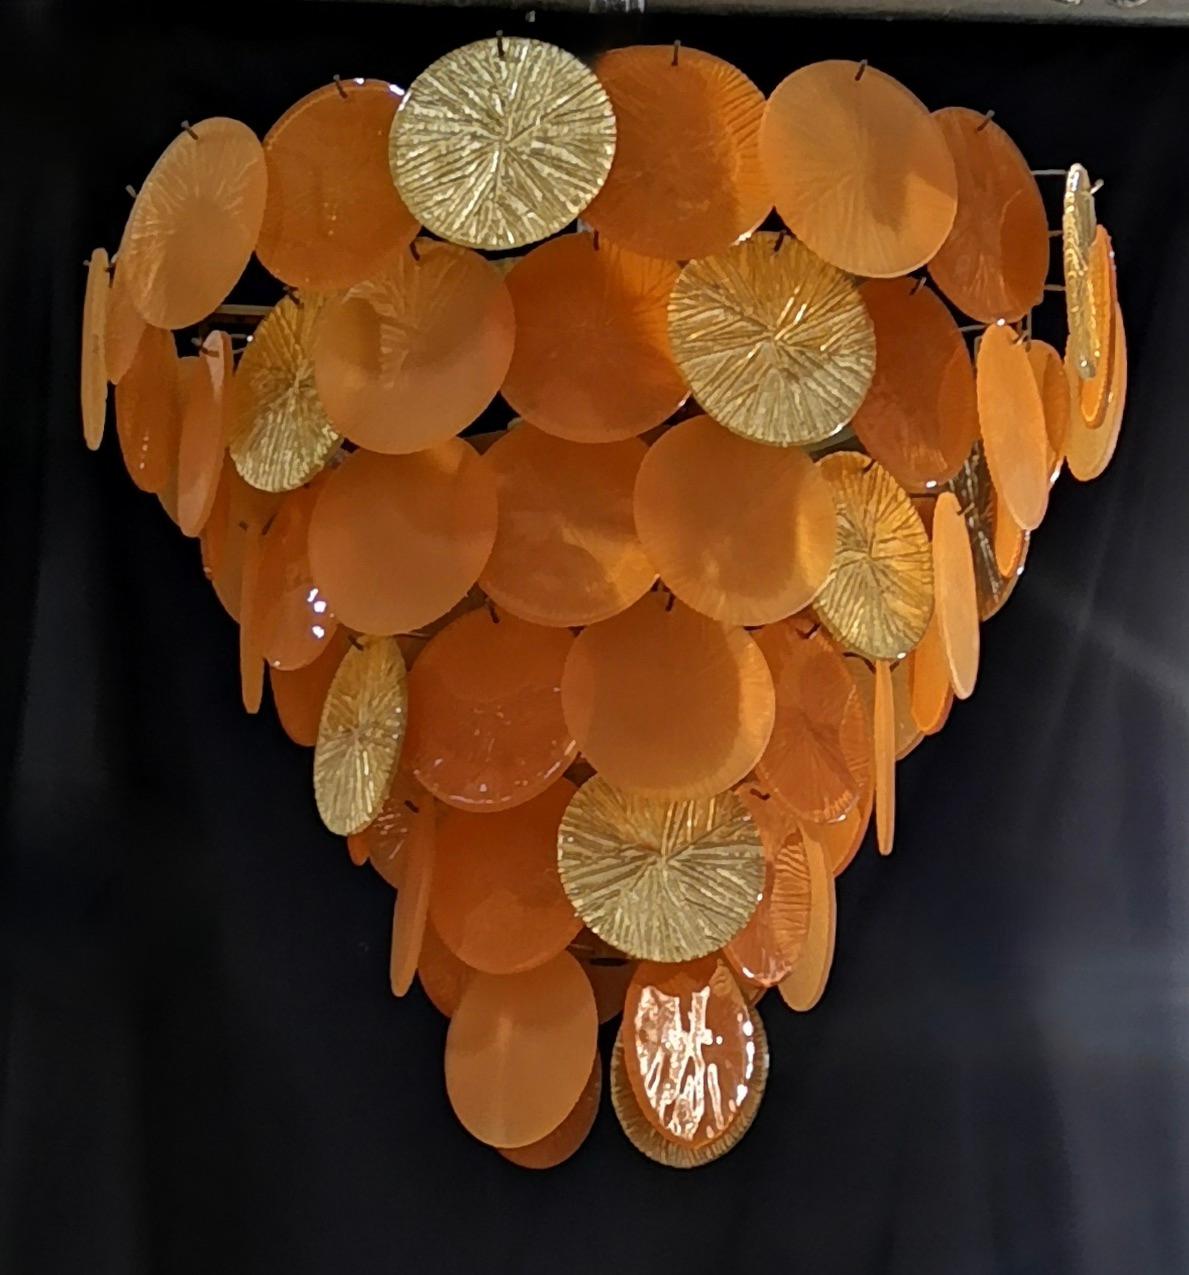 Brilliant Murano chandelier with glass medallions in orange and gold color. 

Composed of an iron structure gold colored, about 120 medallions are hung around it. The chandelier has an inverted pyramid shape with a round base. The chandelier have a